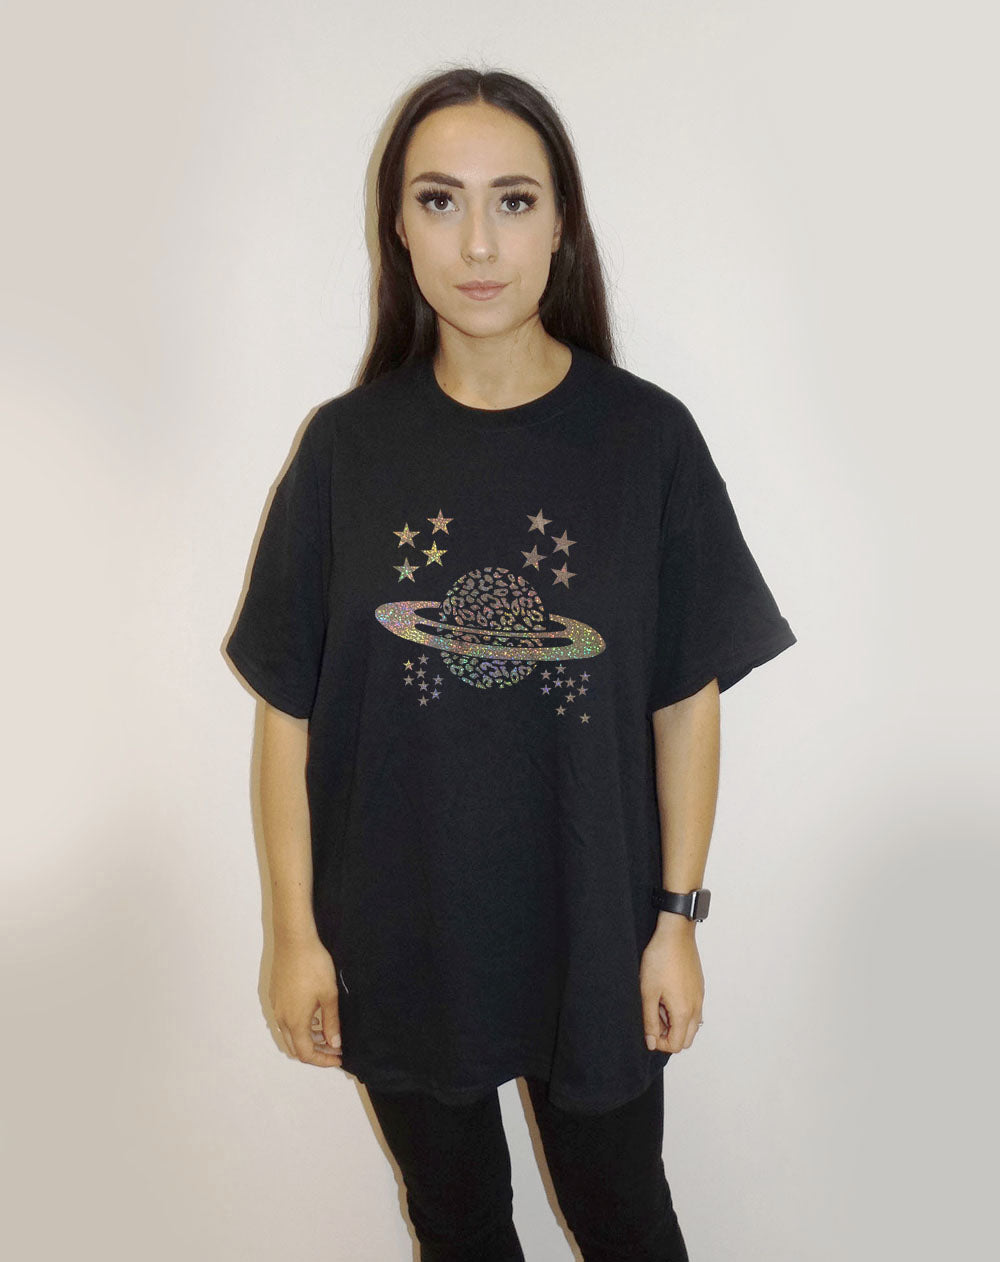 Black Tee With Silver Celestial Glitter Print